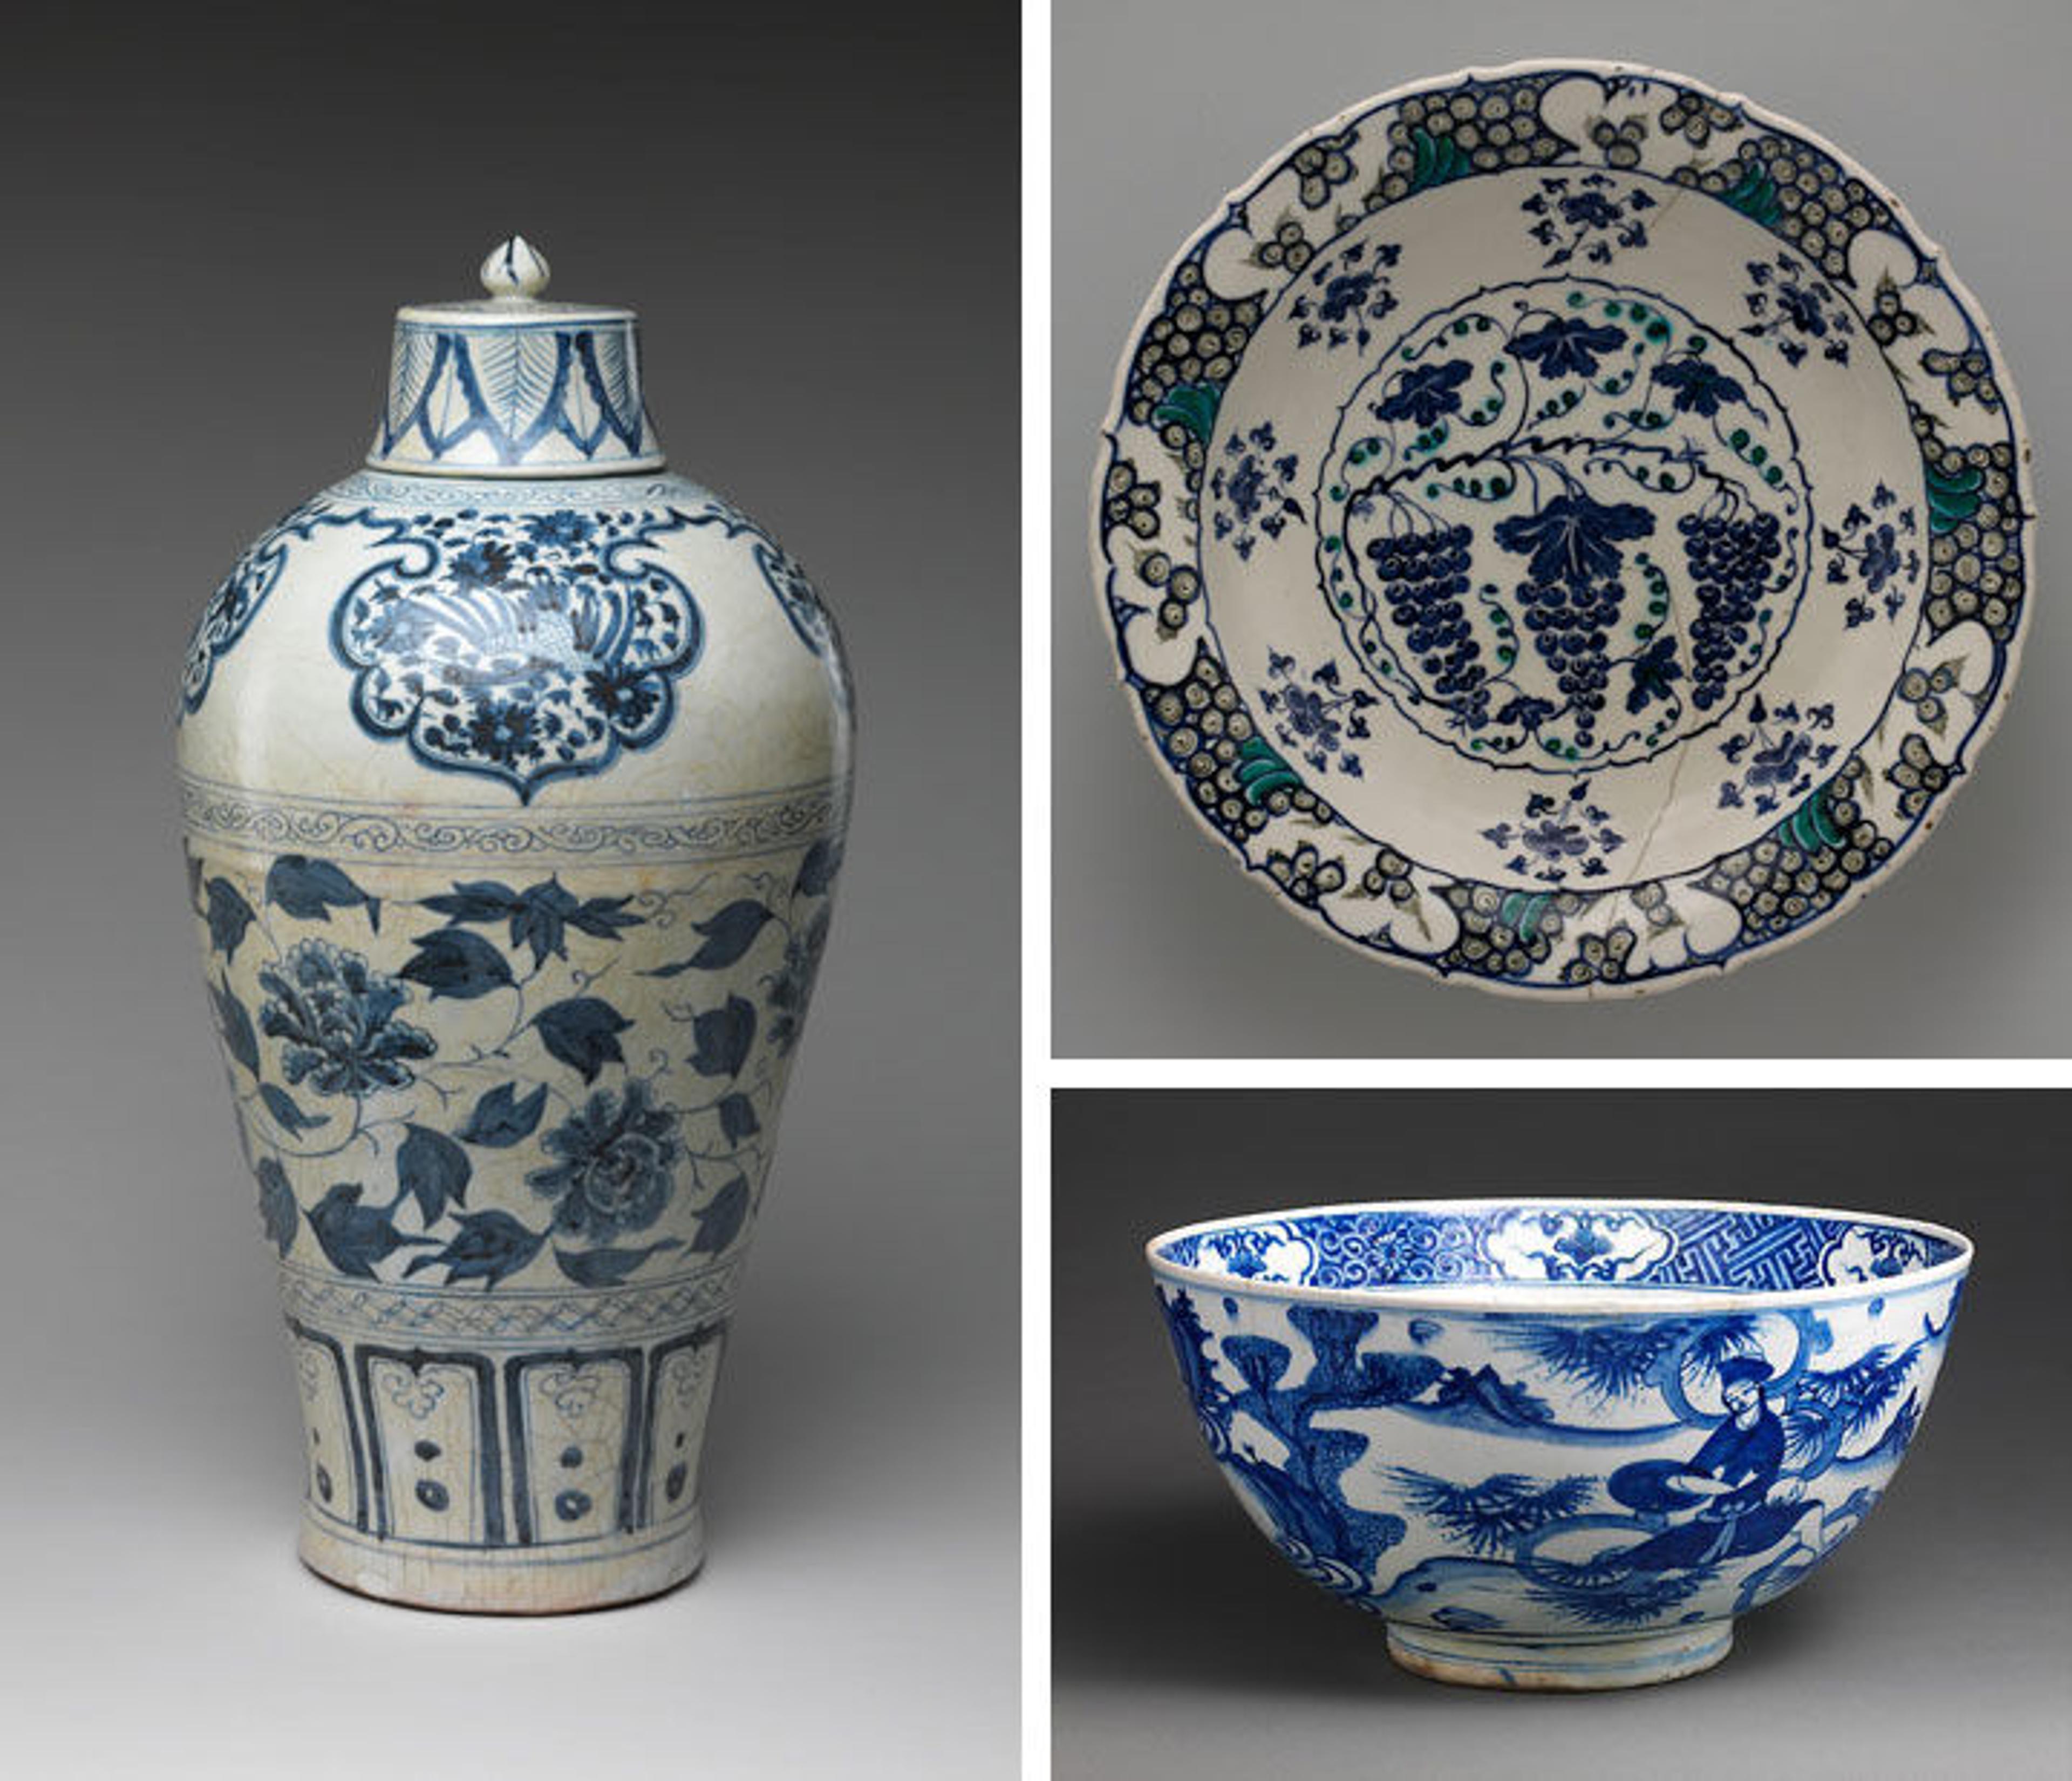 Tracing the Development of Ceramics along the Silk Road - The